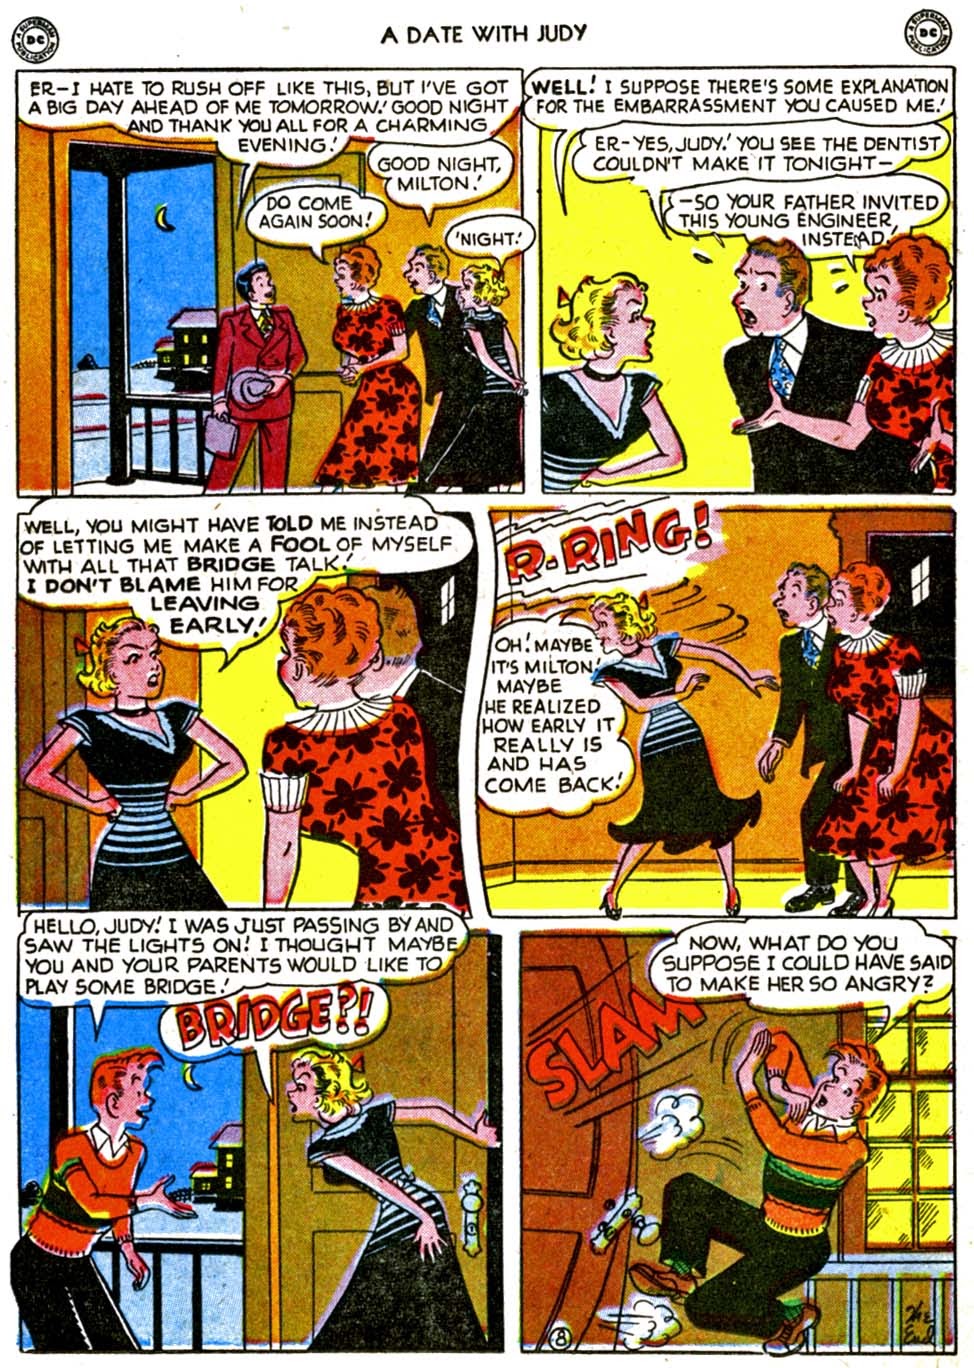 Read online A Date with Judy comic -  Issue #12 - 32